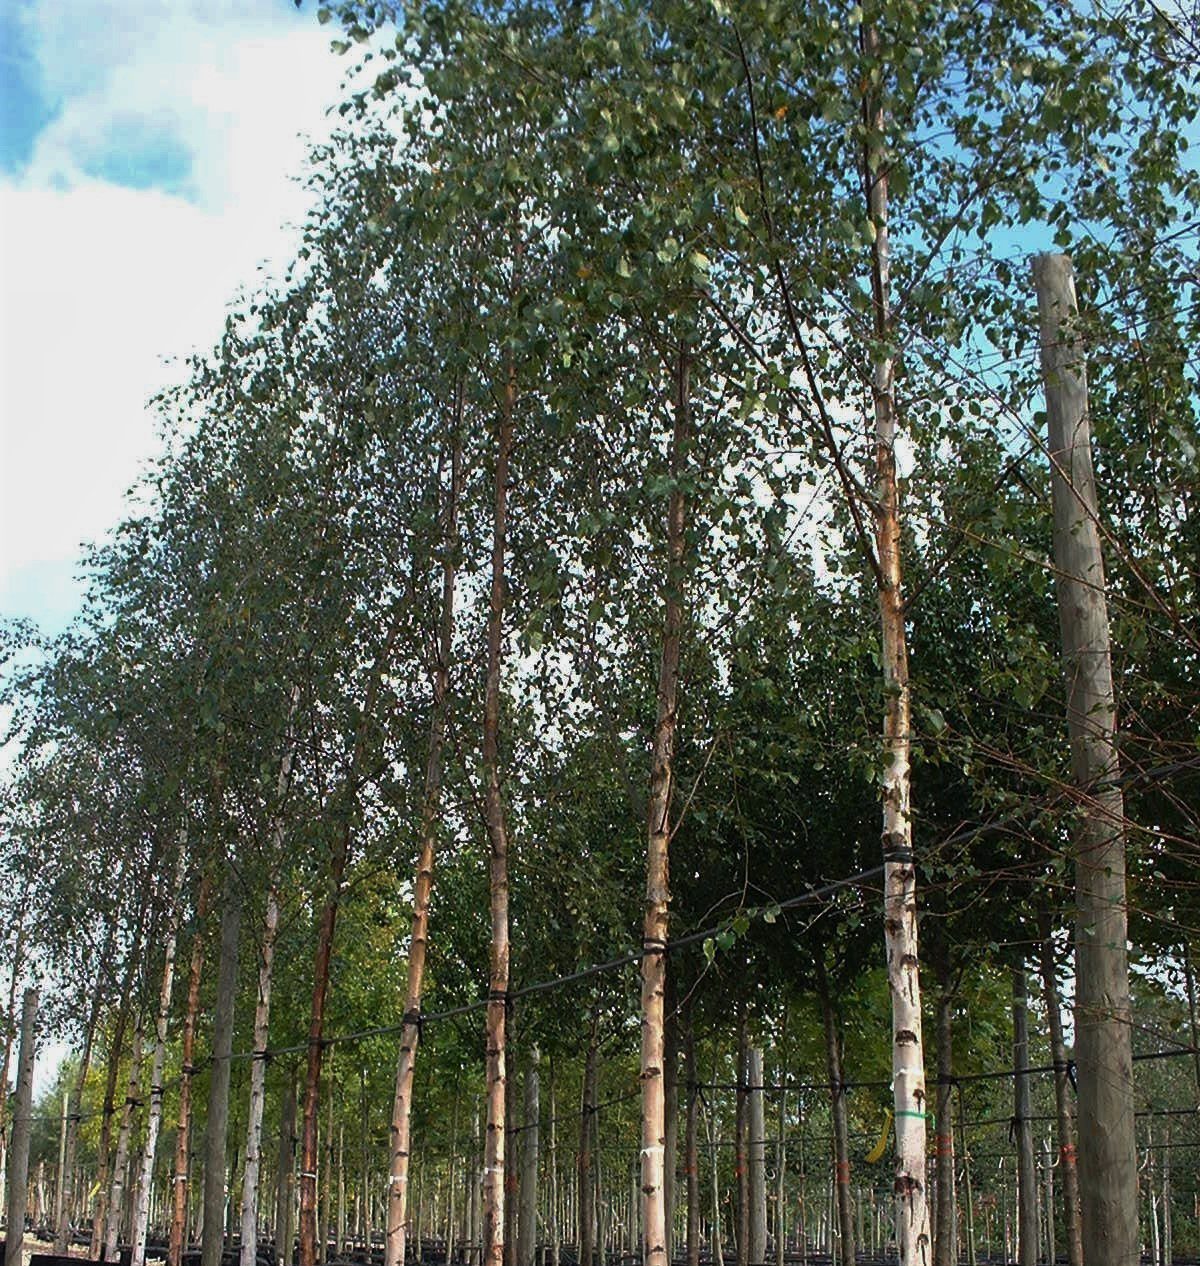 Betula pubescens trees growing in rows